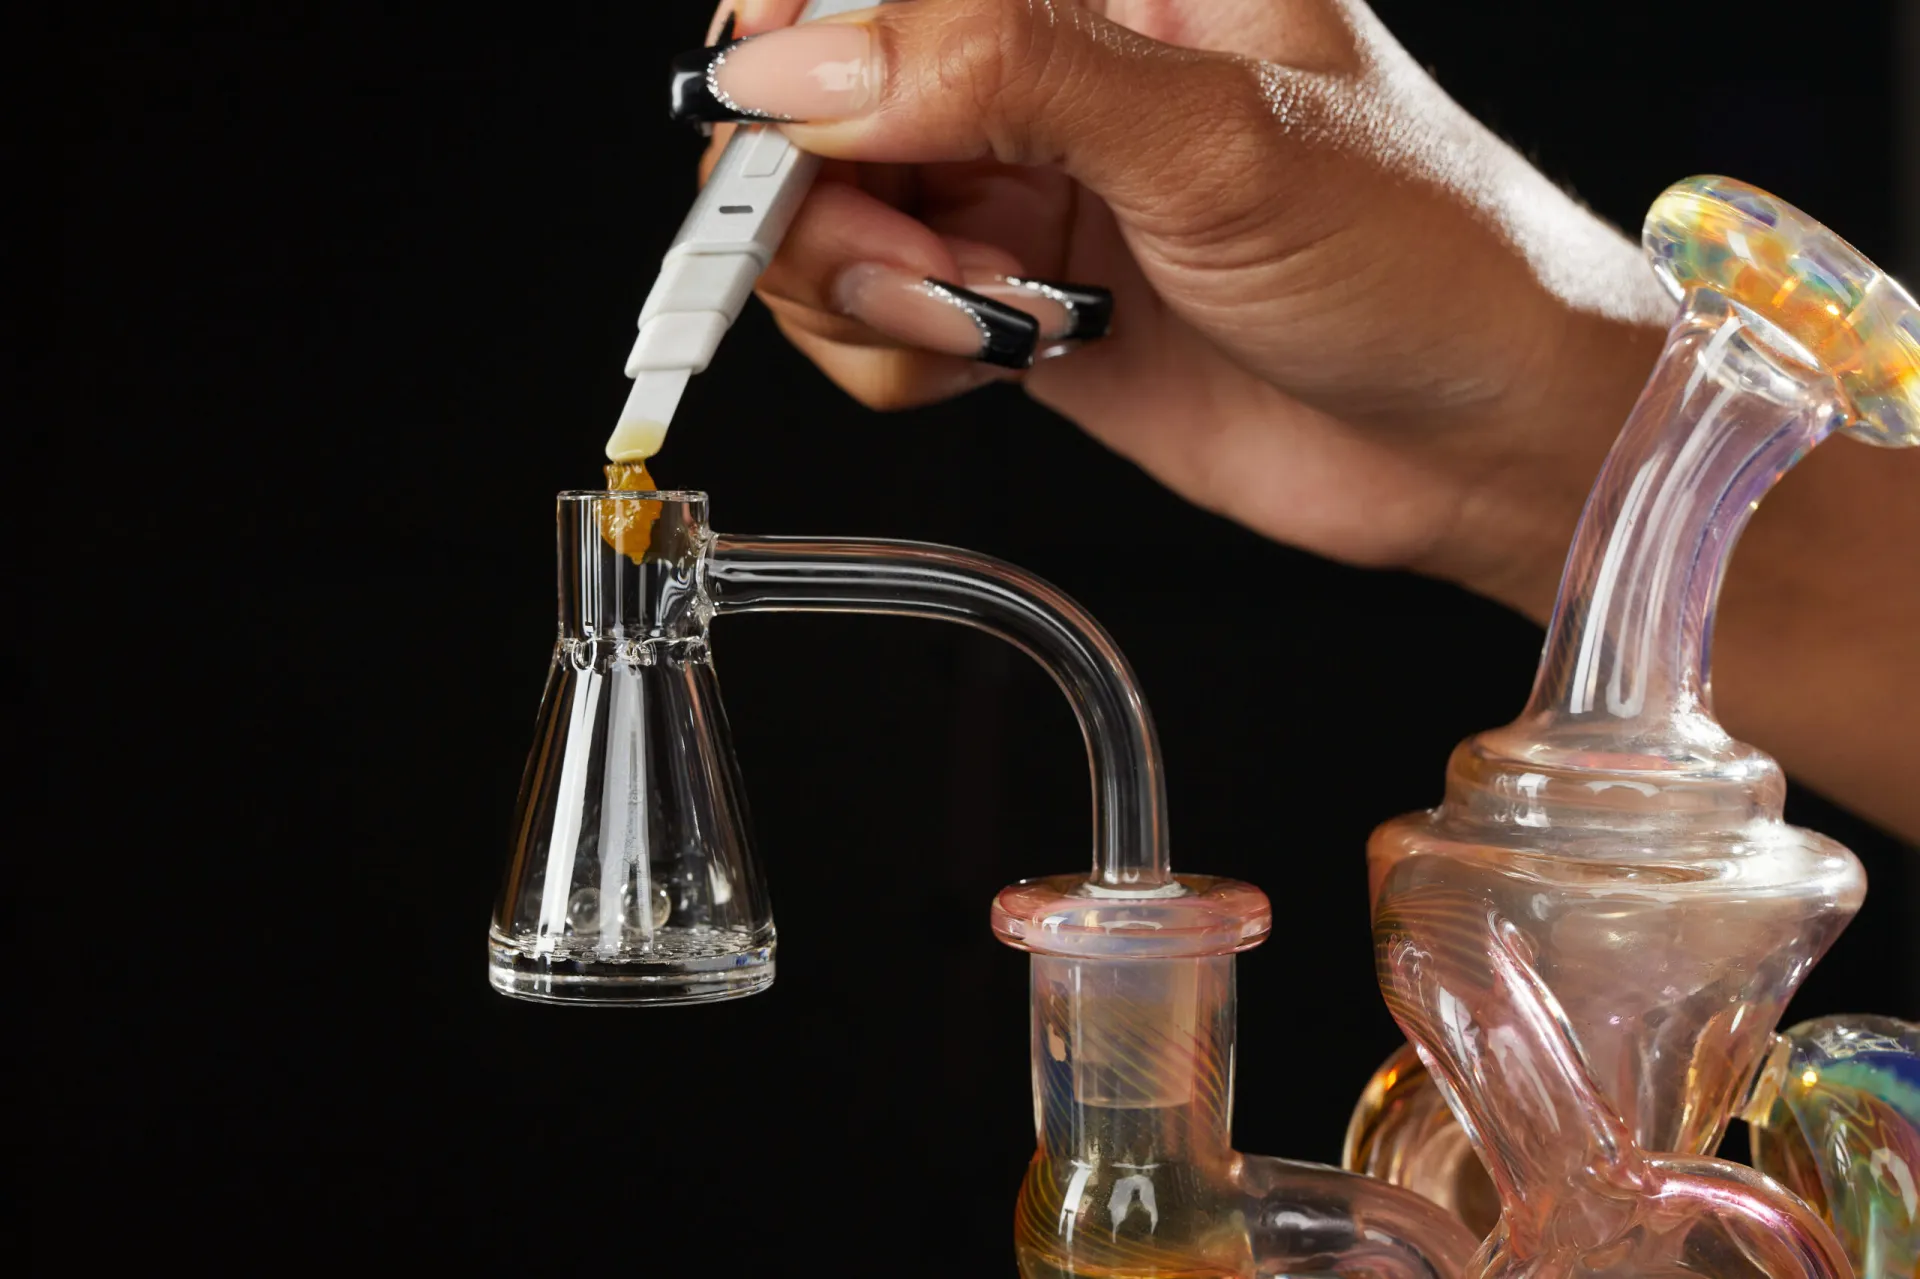 How to Use a Dab Rig?